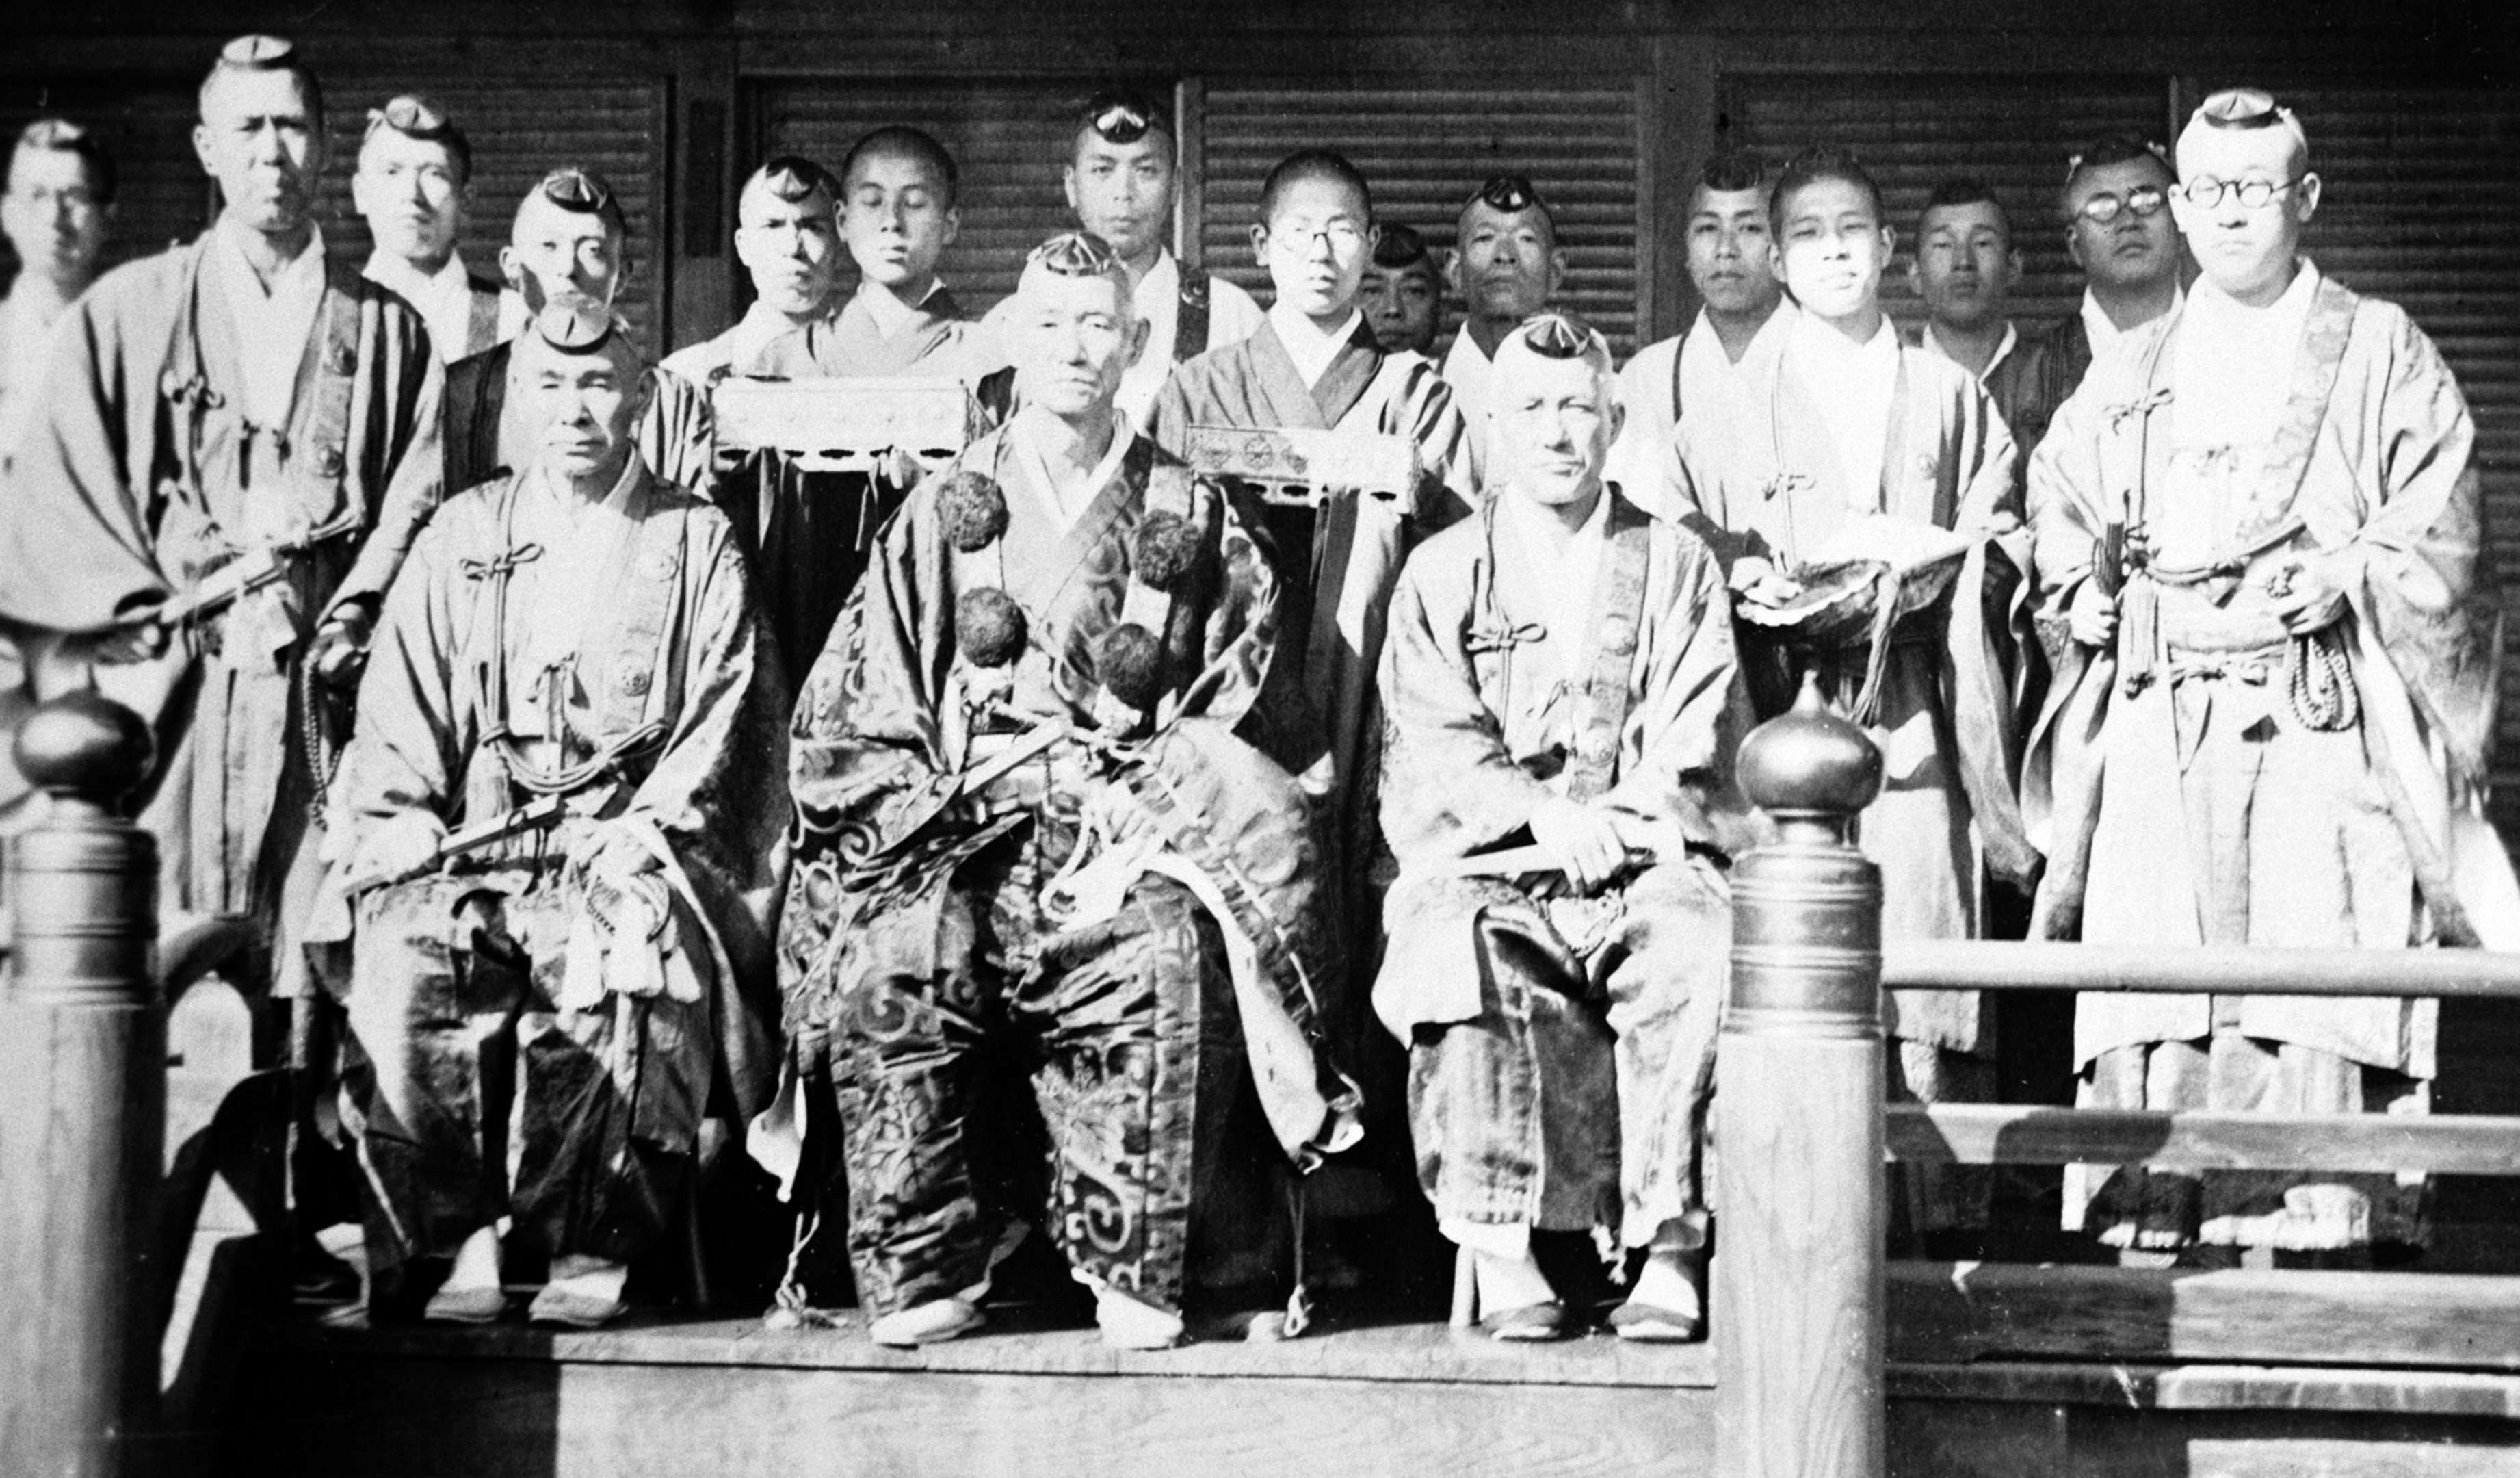 A group of Buddhist priests, 3 seated, 14 standing, all wearing robes, pose for a portrait on a temple portico; the central figure wears elaborate brocade robes adorned with pom-poms.